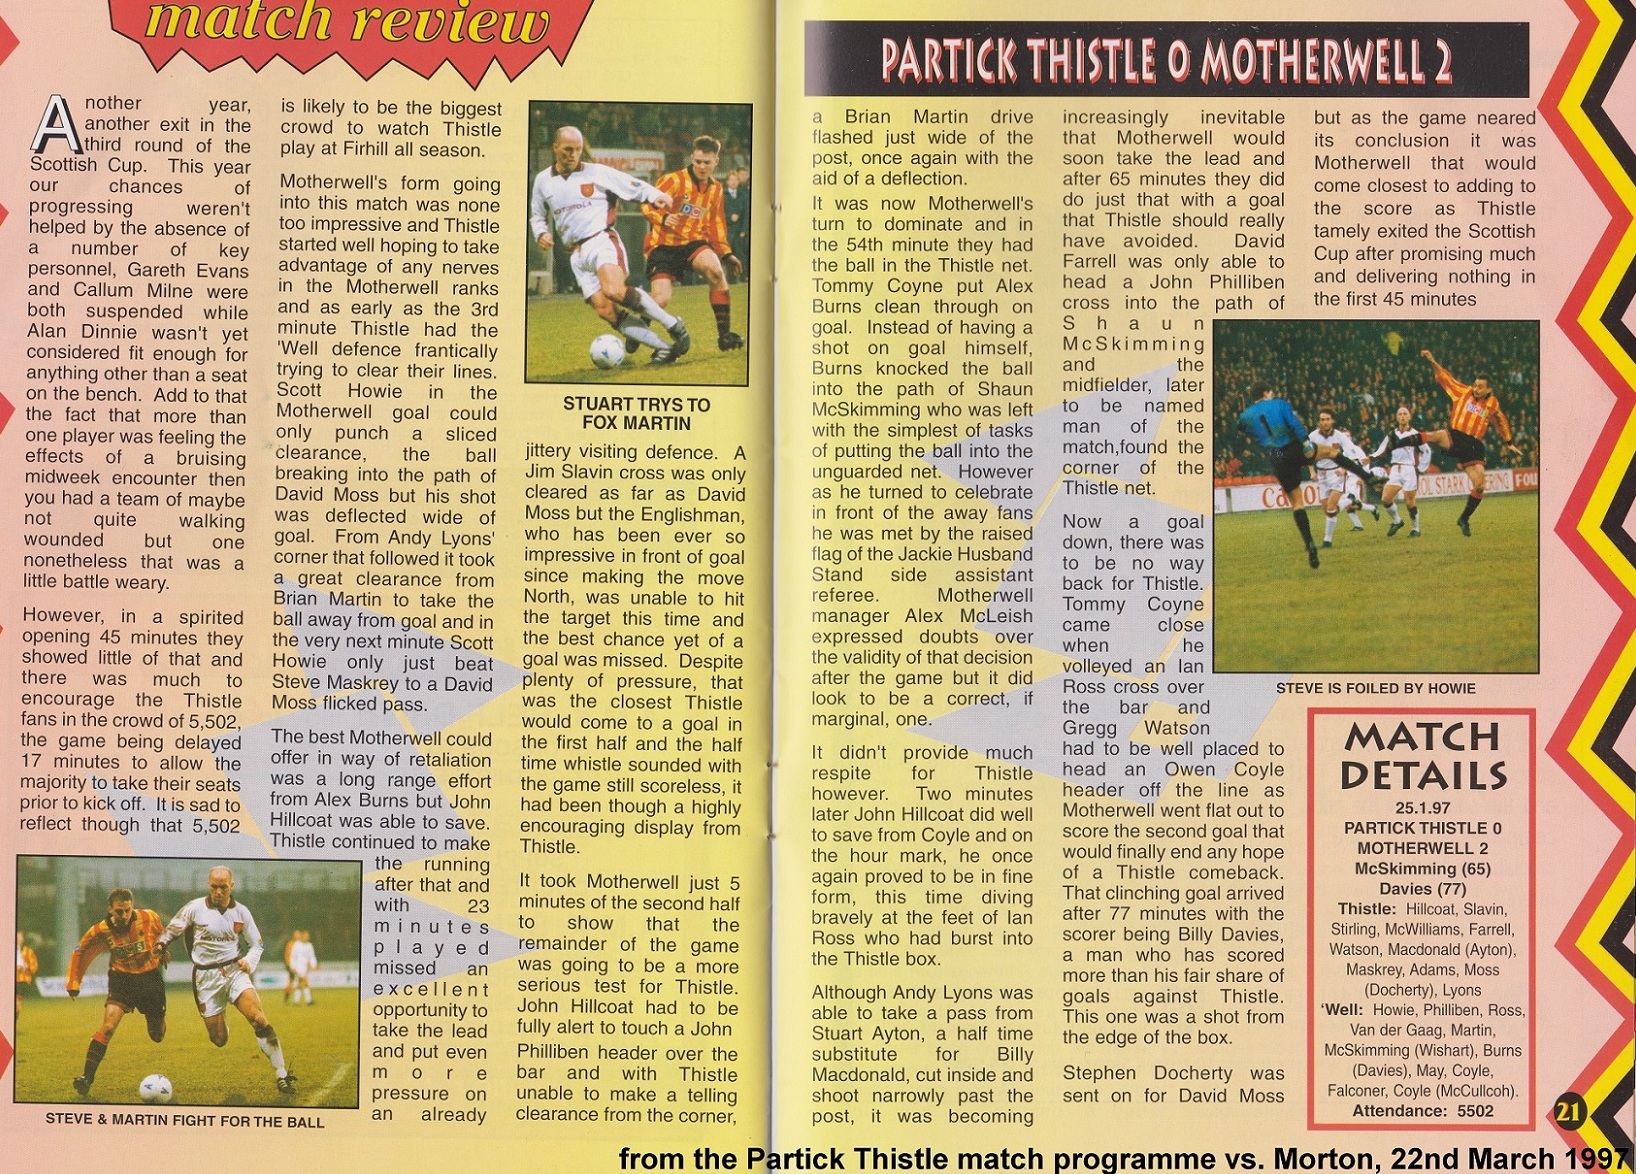 Partick Thistle versus Motherwell Match Report taken from Thistle Programme